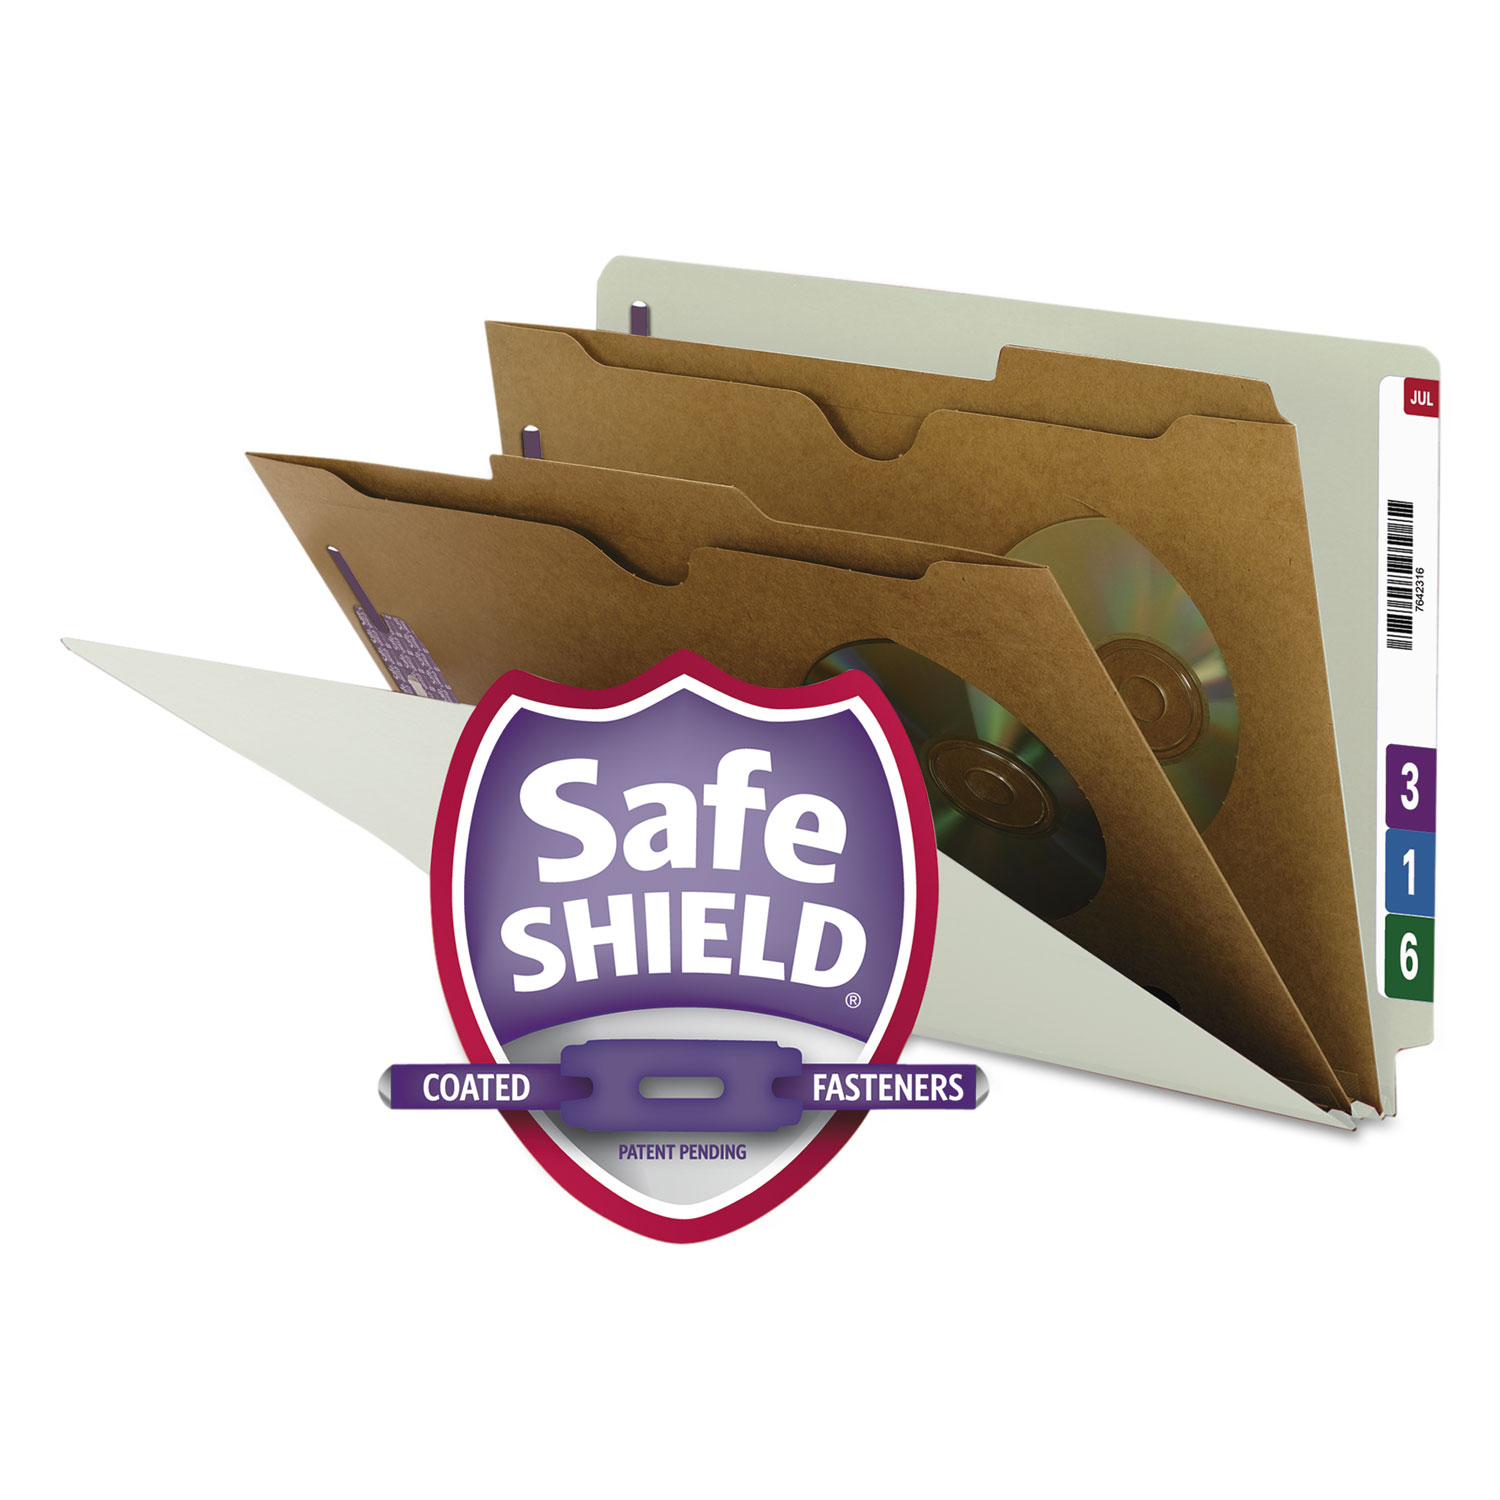  Smead 29710 X-Heavy 2-Pocket End Tab Pressboard Classification Folders with SafeSHIELD Fasteners, 2 Dividers, Legal, Gray-Green, 10/BX (SMD29710) 